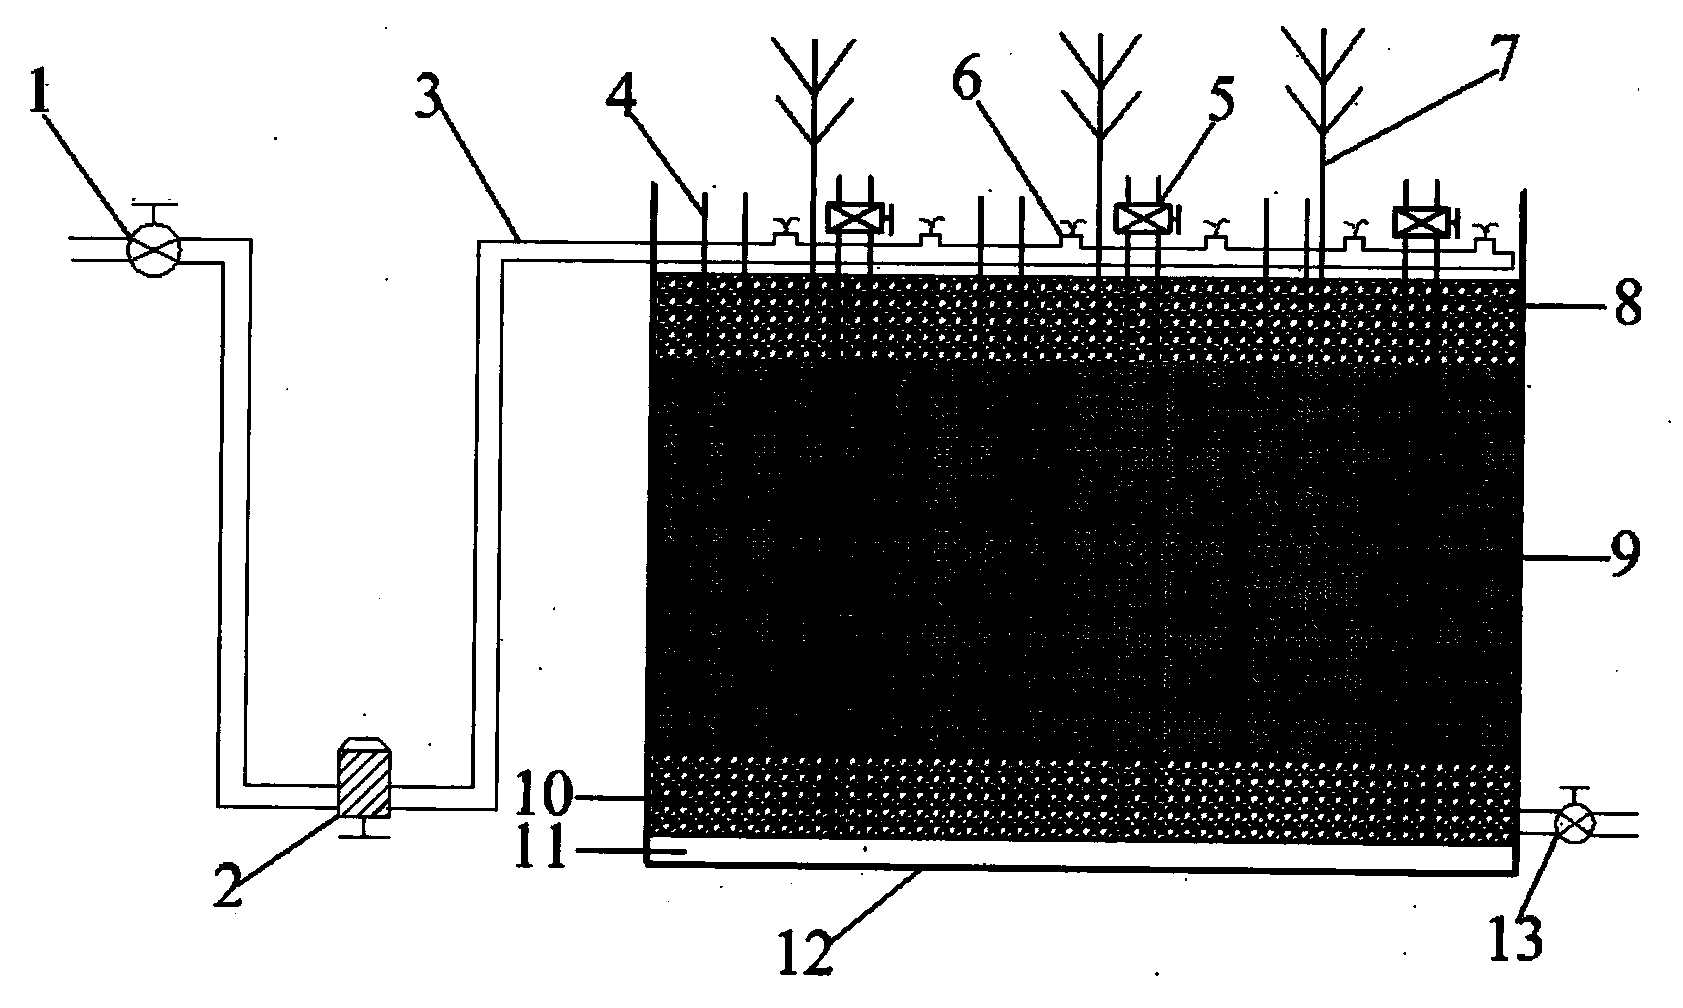 Vertical flow artificial wetland aerobic denitrification system for intermittent operation